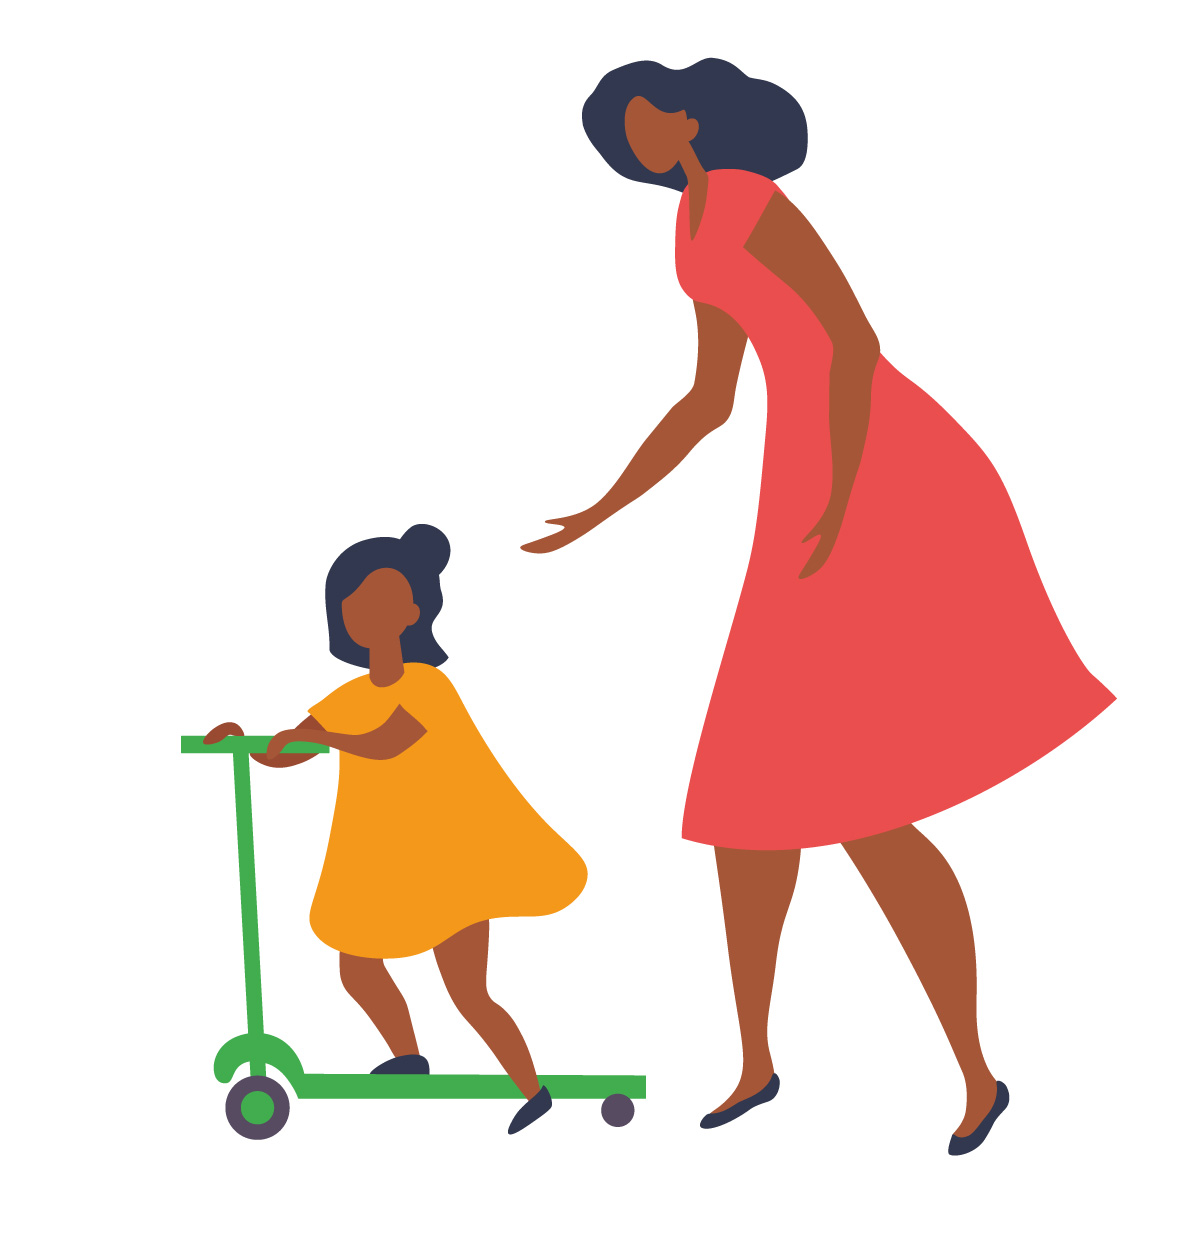 Illustration of a parent following behind a child who is on a scooter